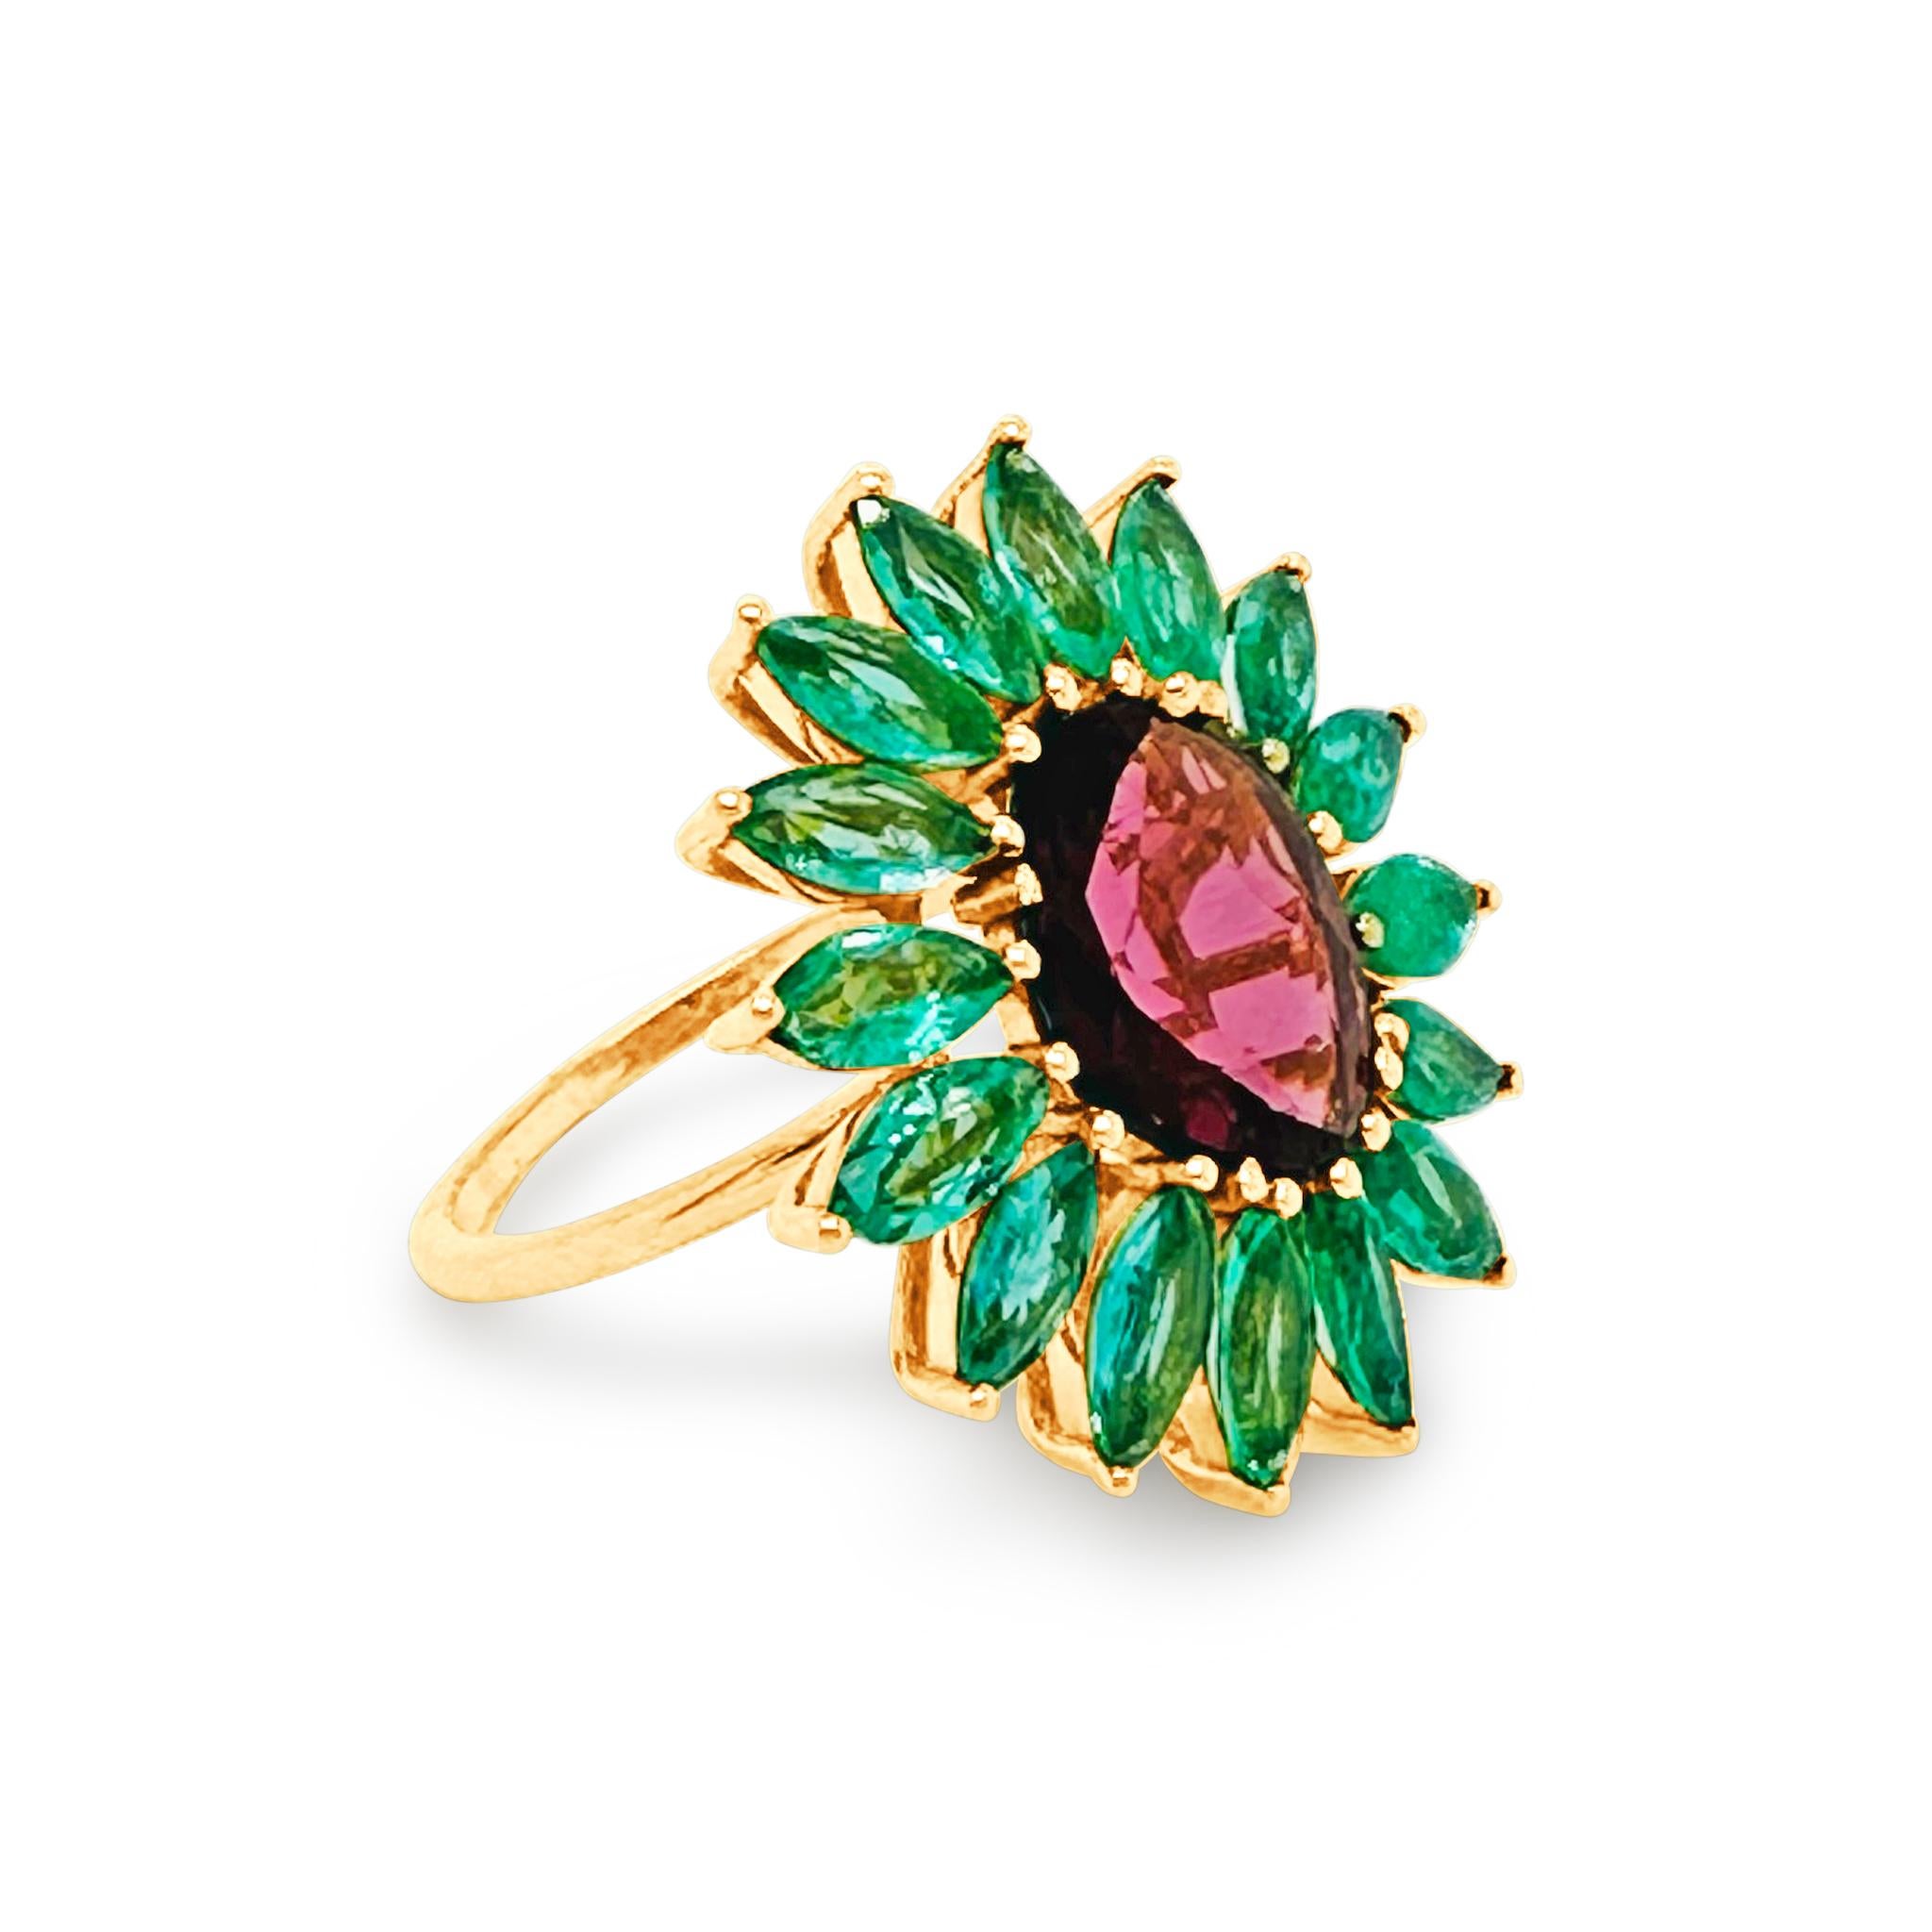 Tresor Gemstone Ring features 4.87 carats Gemstone in 18k yellow gold. The Ring are an ode to the luxurious yet classic beauty with sparkly diamonds. Their contemporary and modern design makes them versatile in their use. The Ring are perfect to be